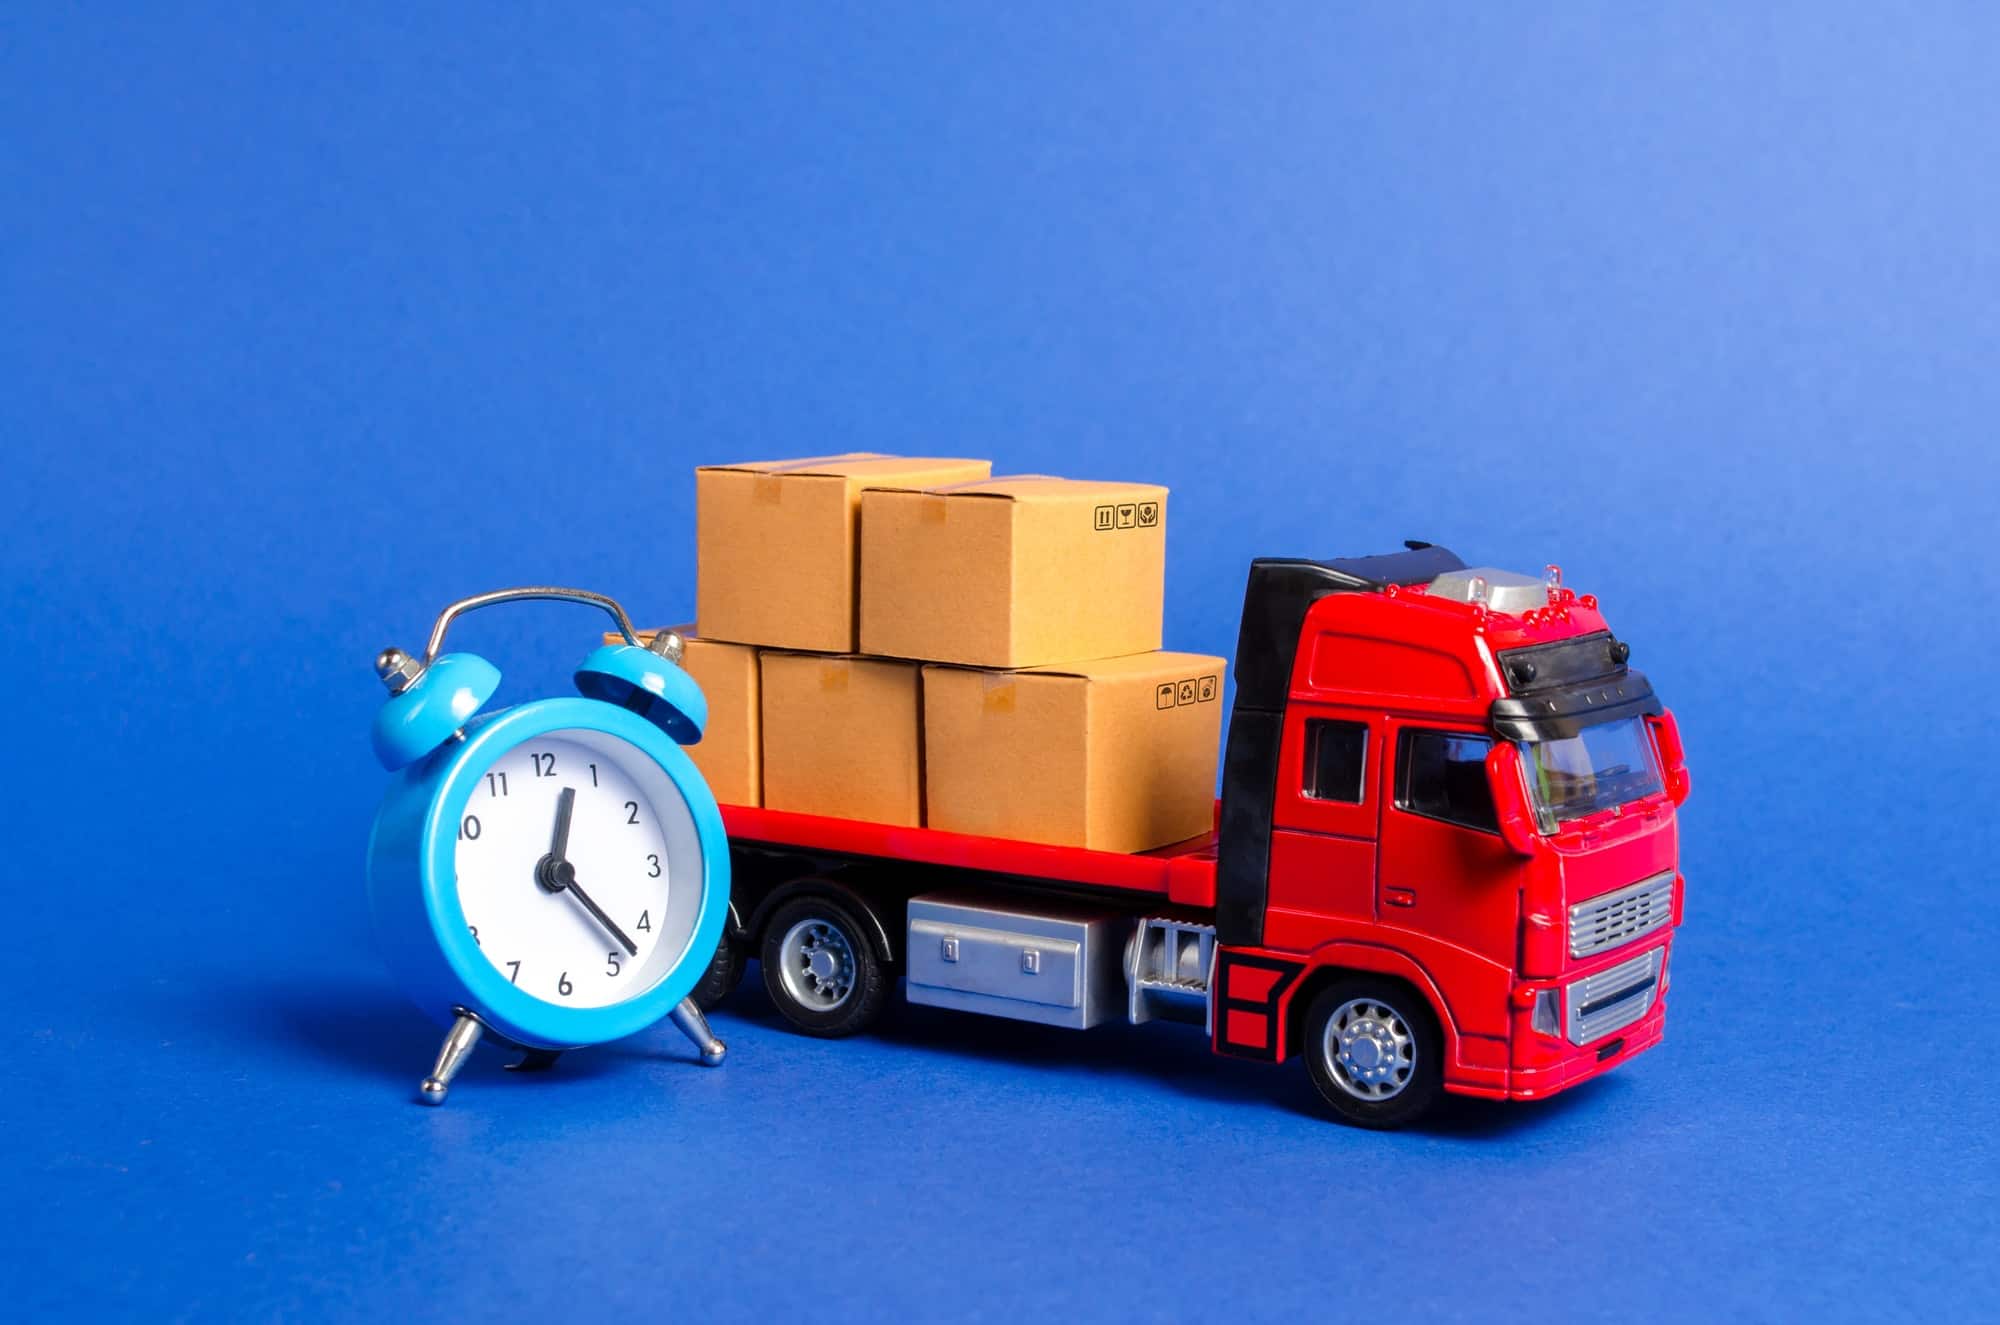 A red truck with cardboard boxes and a blue alarm clock